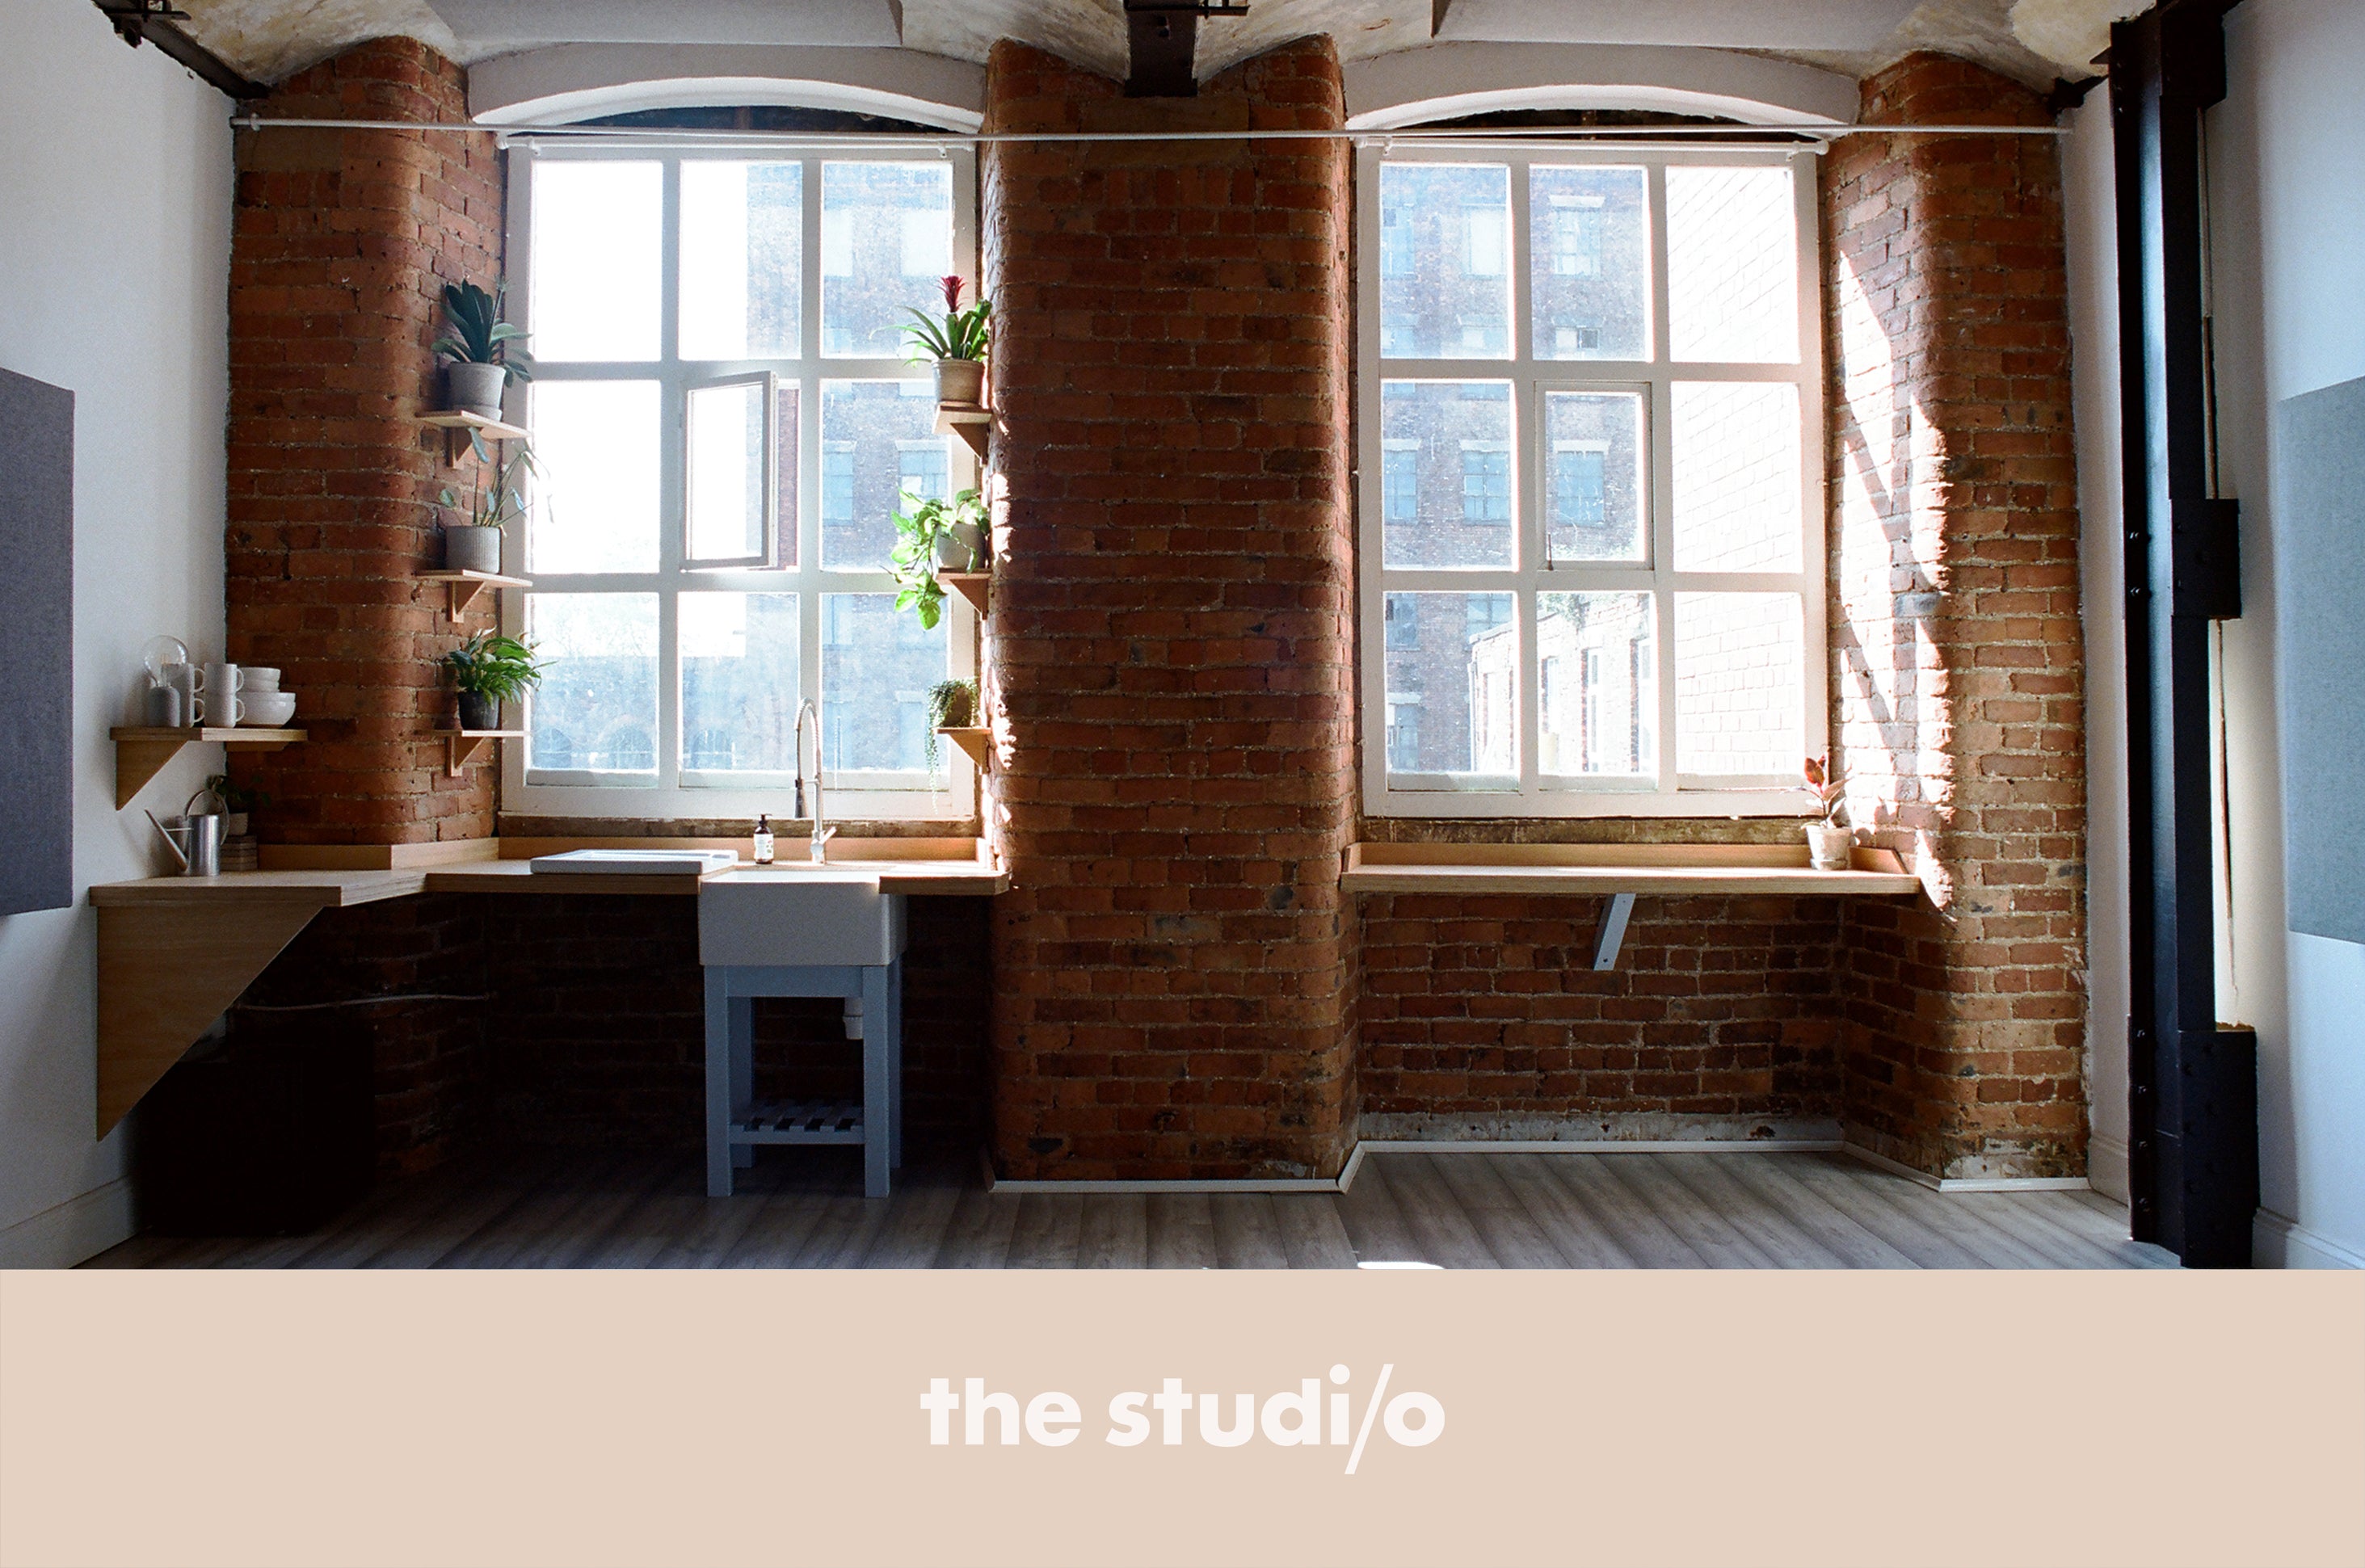 The Studi/o Manchester | Interview